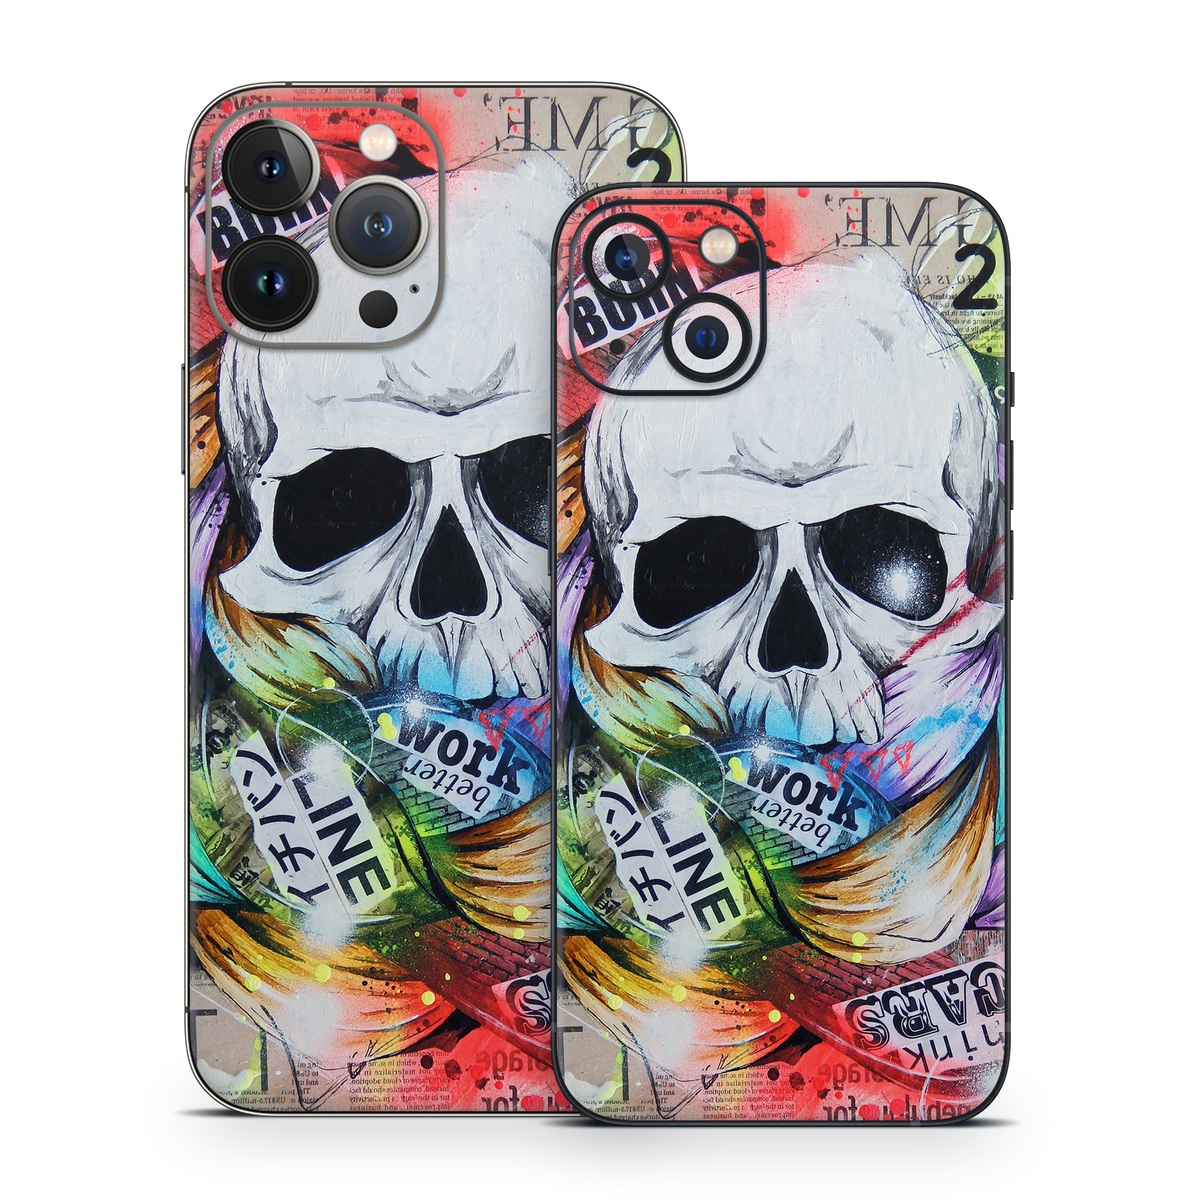 iPhone 13 Series Skin design of Street art, Text, Graphic design, Font, Illustration, Art, Graffiti, Skull, Poster, Advertising, with gray, black, red, green, blue colors